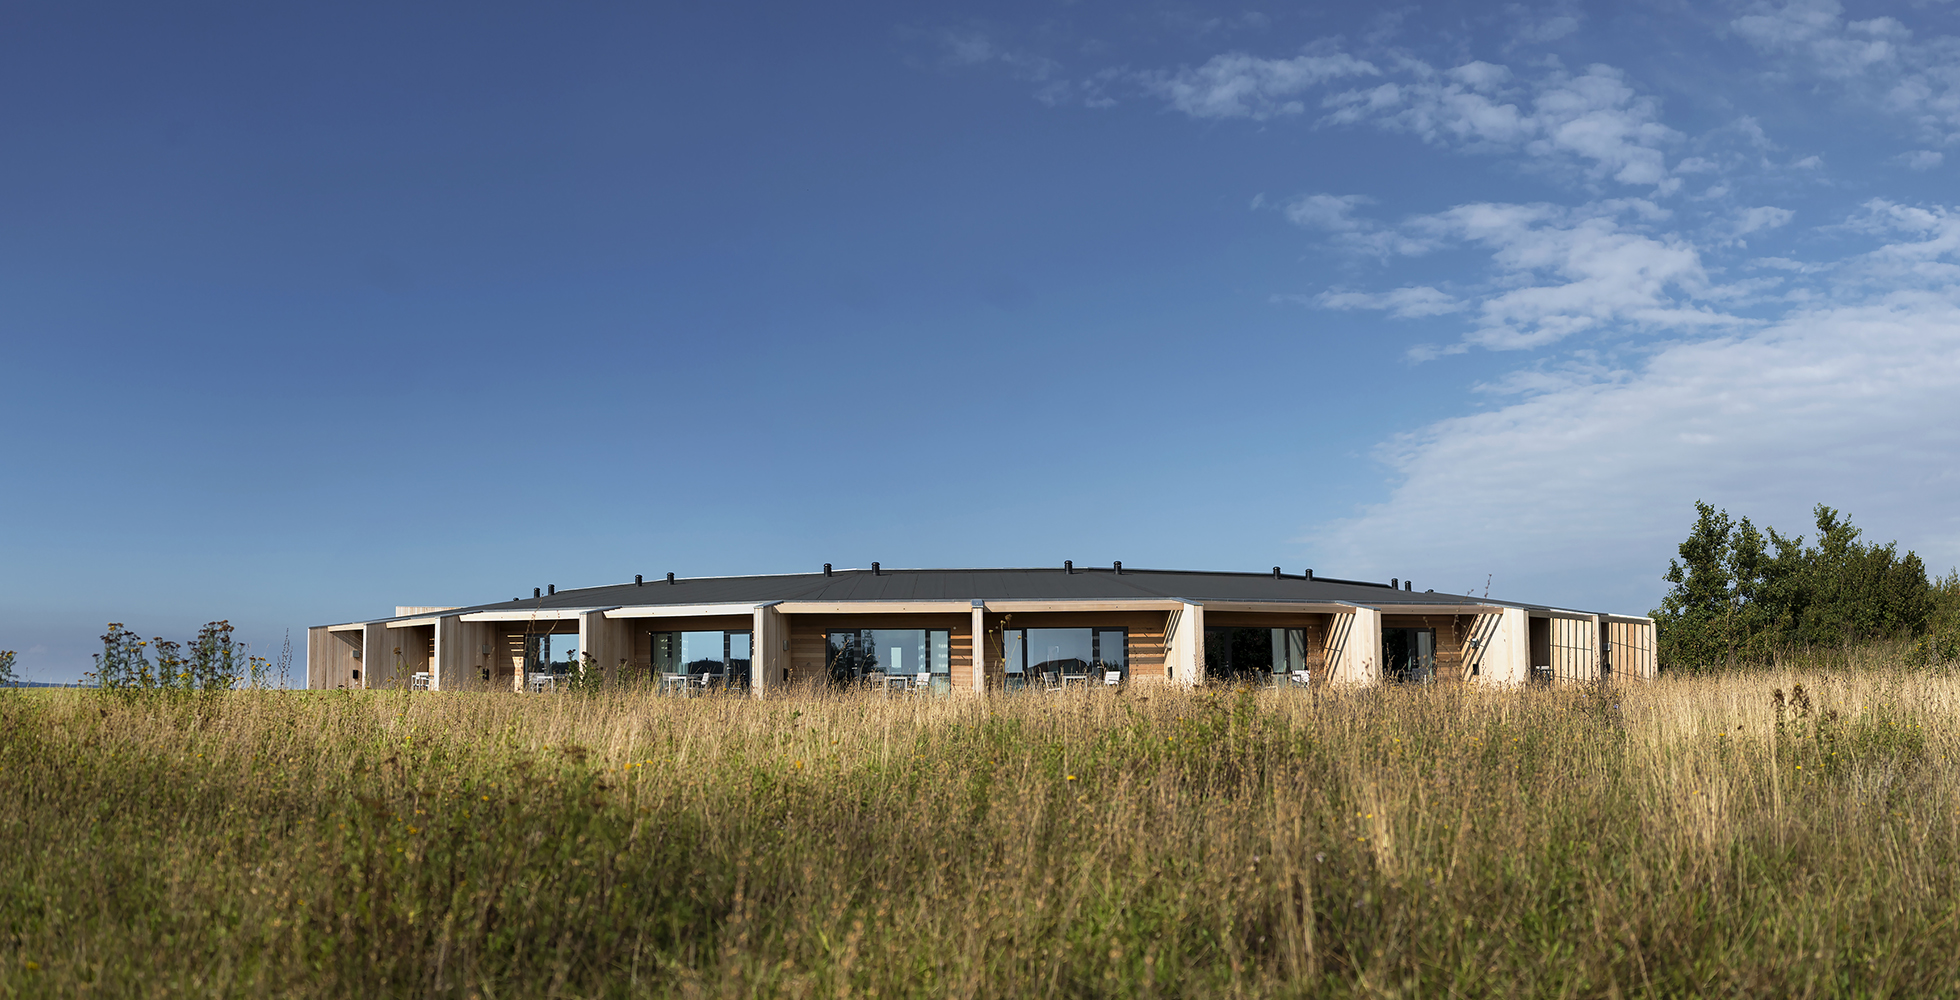 Photo of Musholm Holiday Centre by AART architects. Photo credit: AART architects